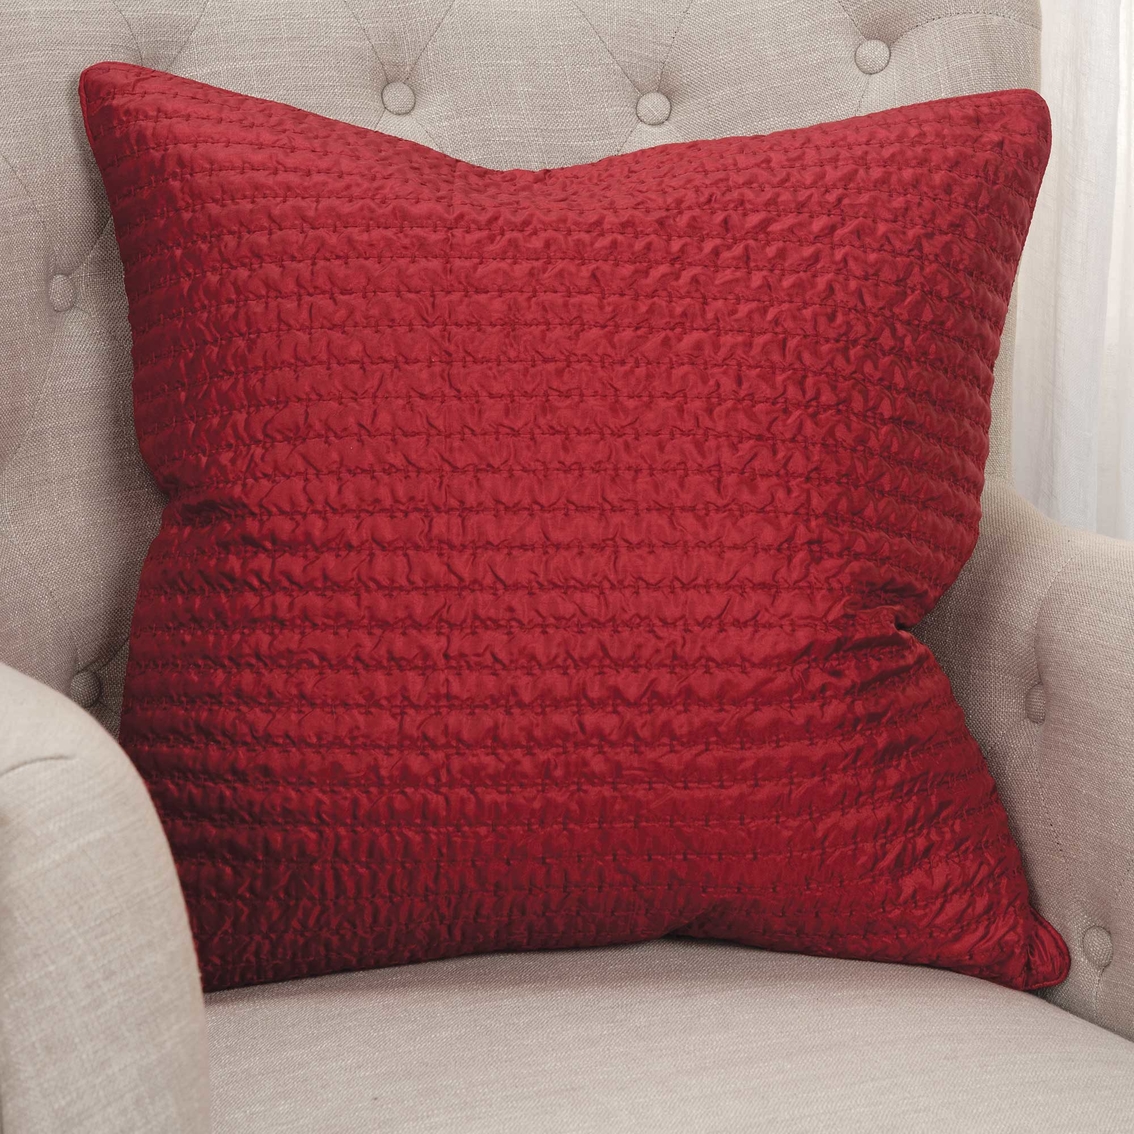 Rizzy Home Solid Deep Red Polyester Filled Pillow - Image 2 of 5